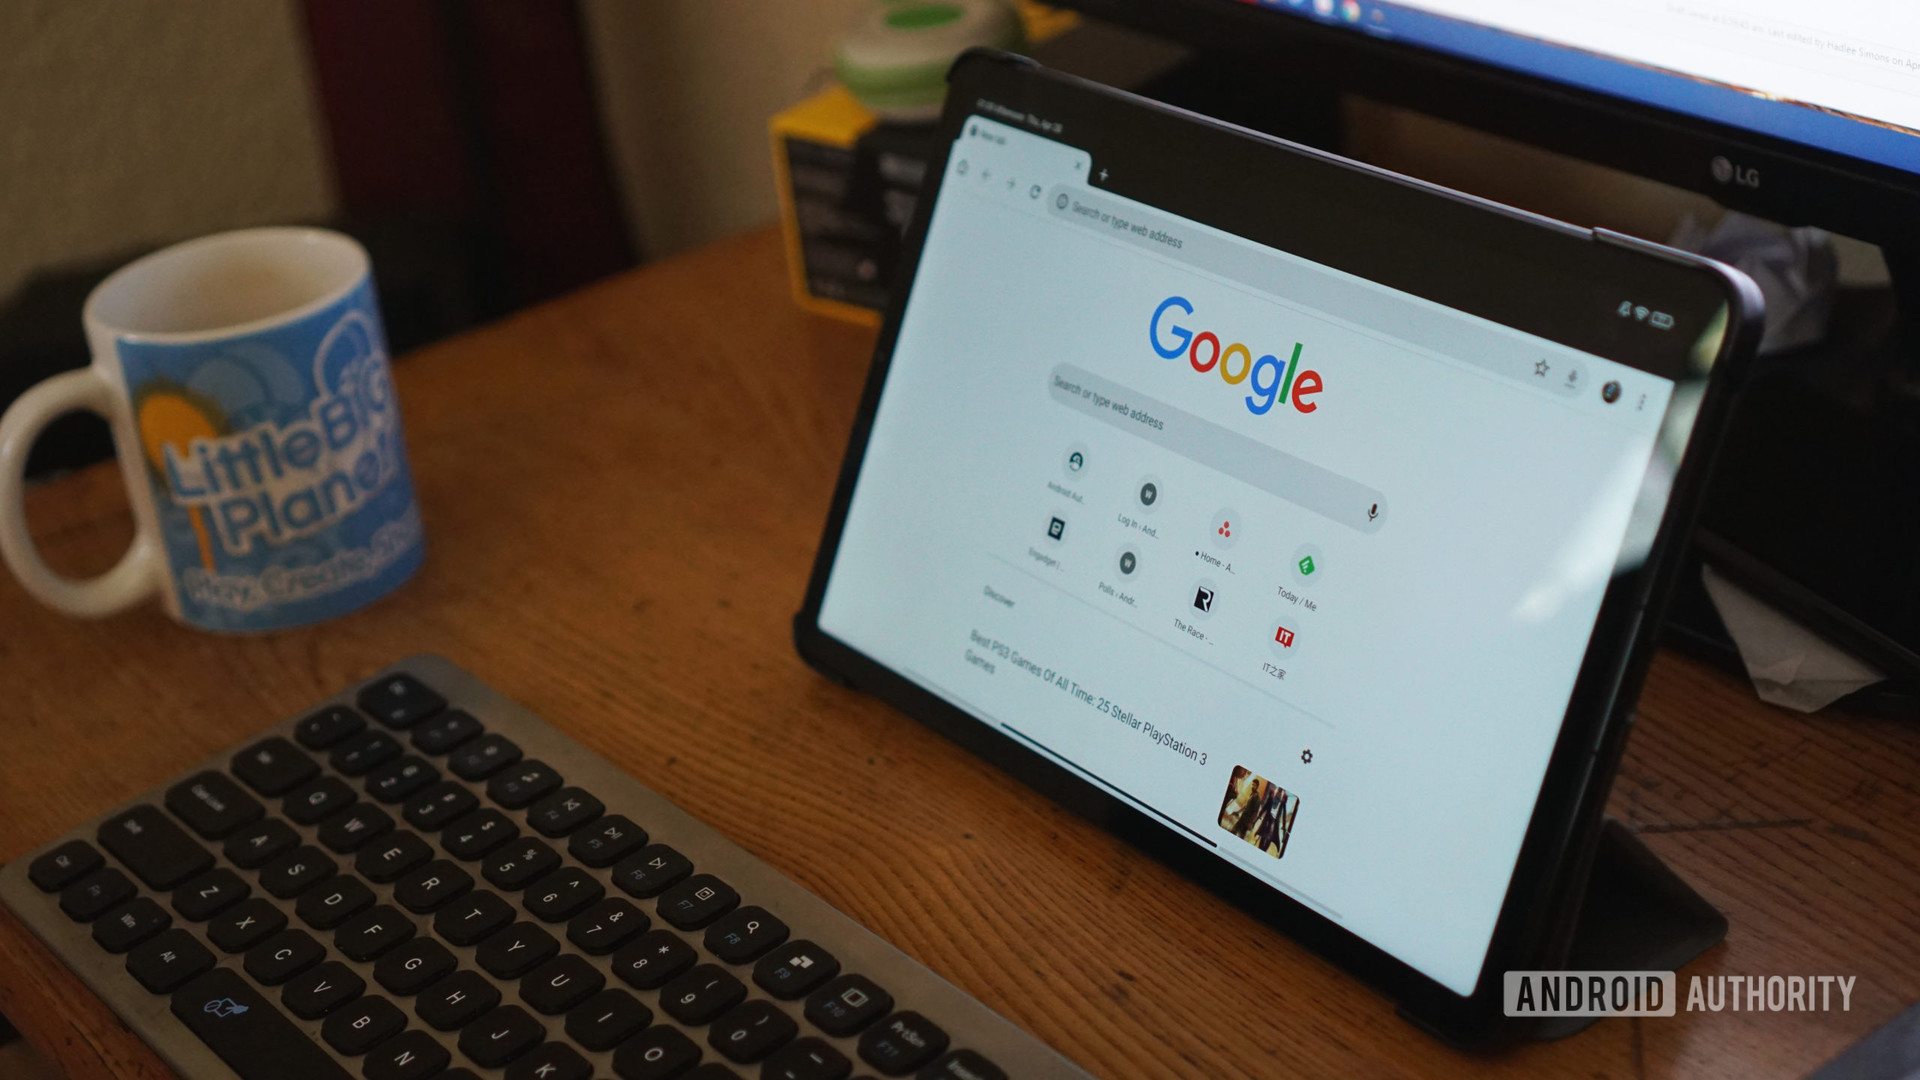 Android tablets are exciting again, but Chrome hasn’t kept up